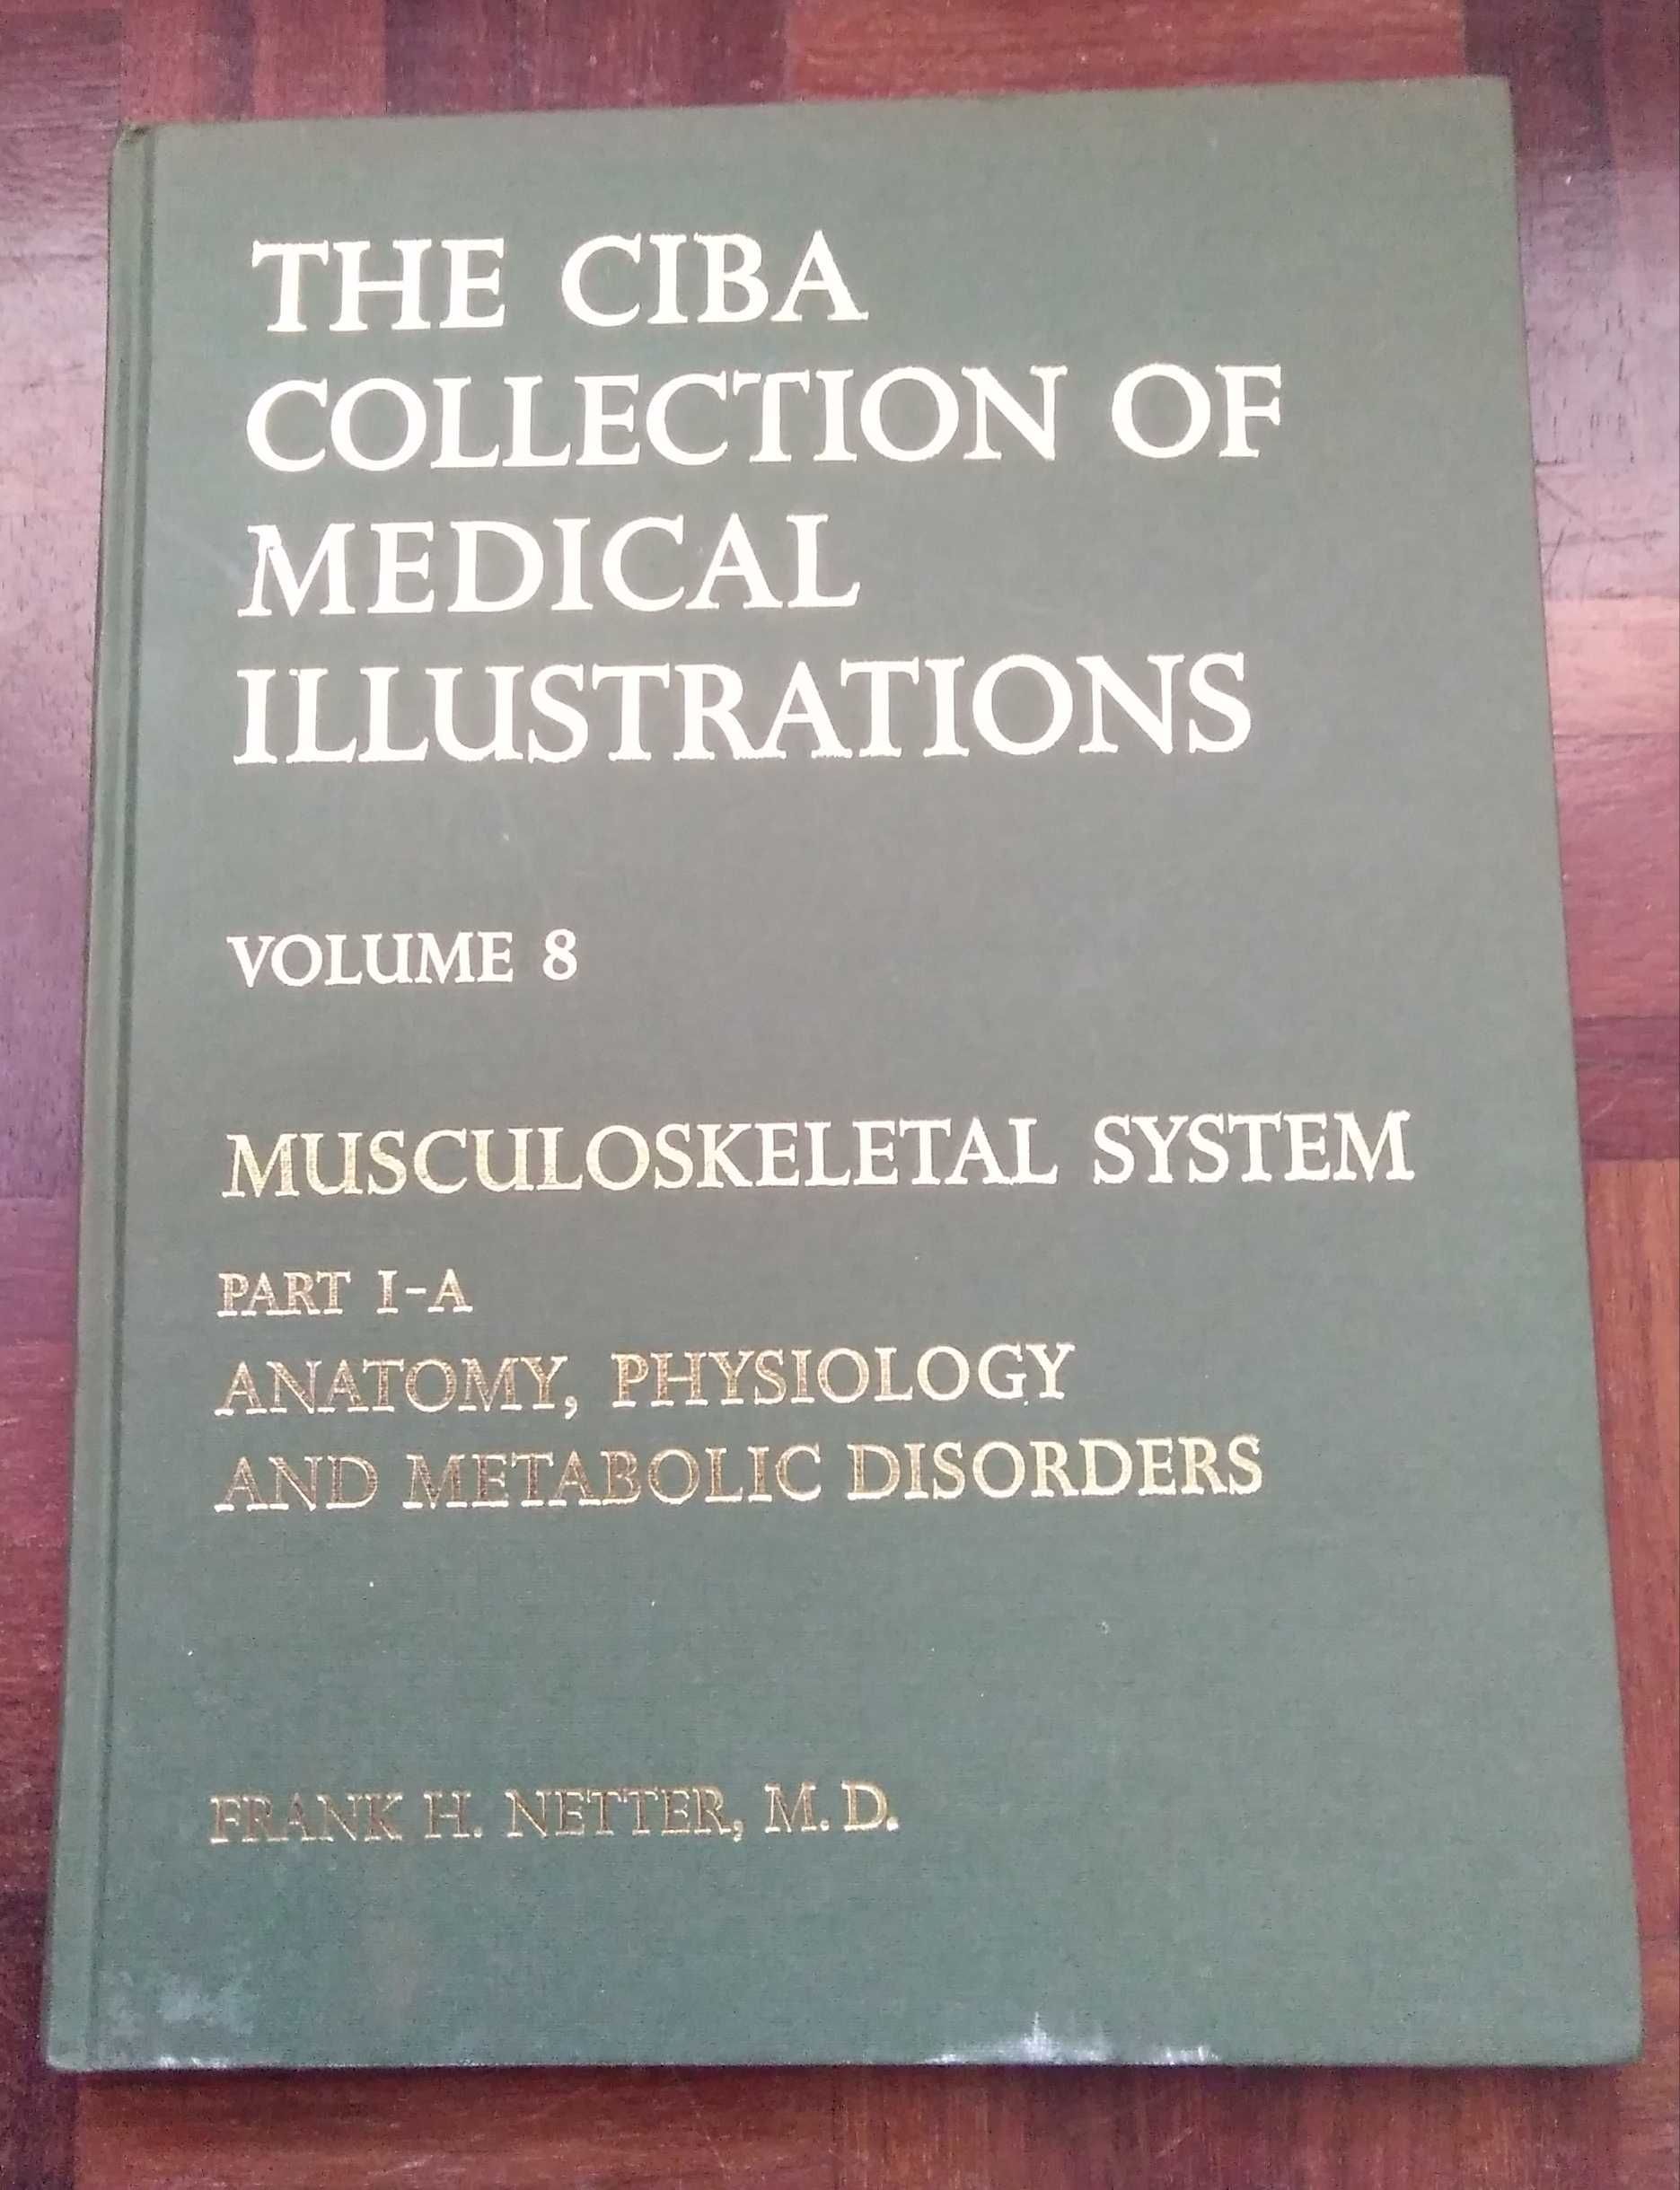 CIBA Collection of Medical Illustrations, Volume 8 by Frank H. Better